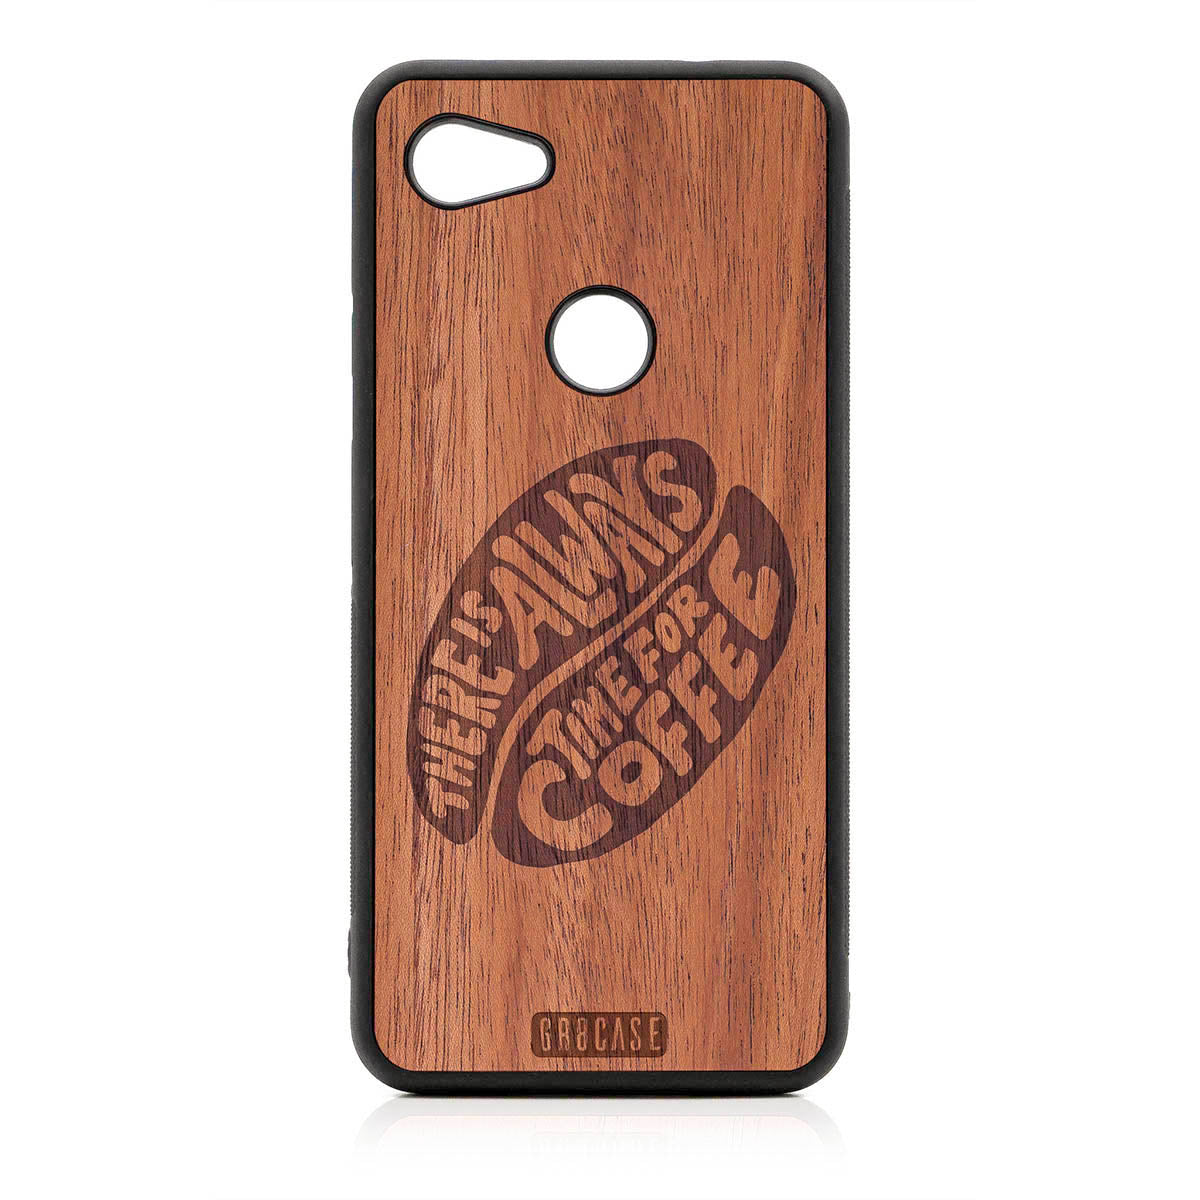 There Is Always Time For Coffee Design Wood Case For Google Pixel 3A